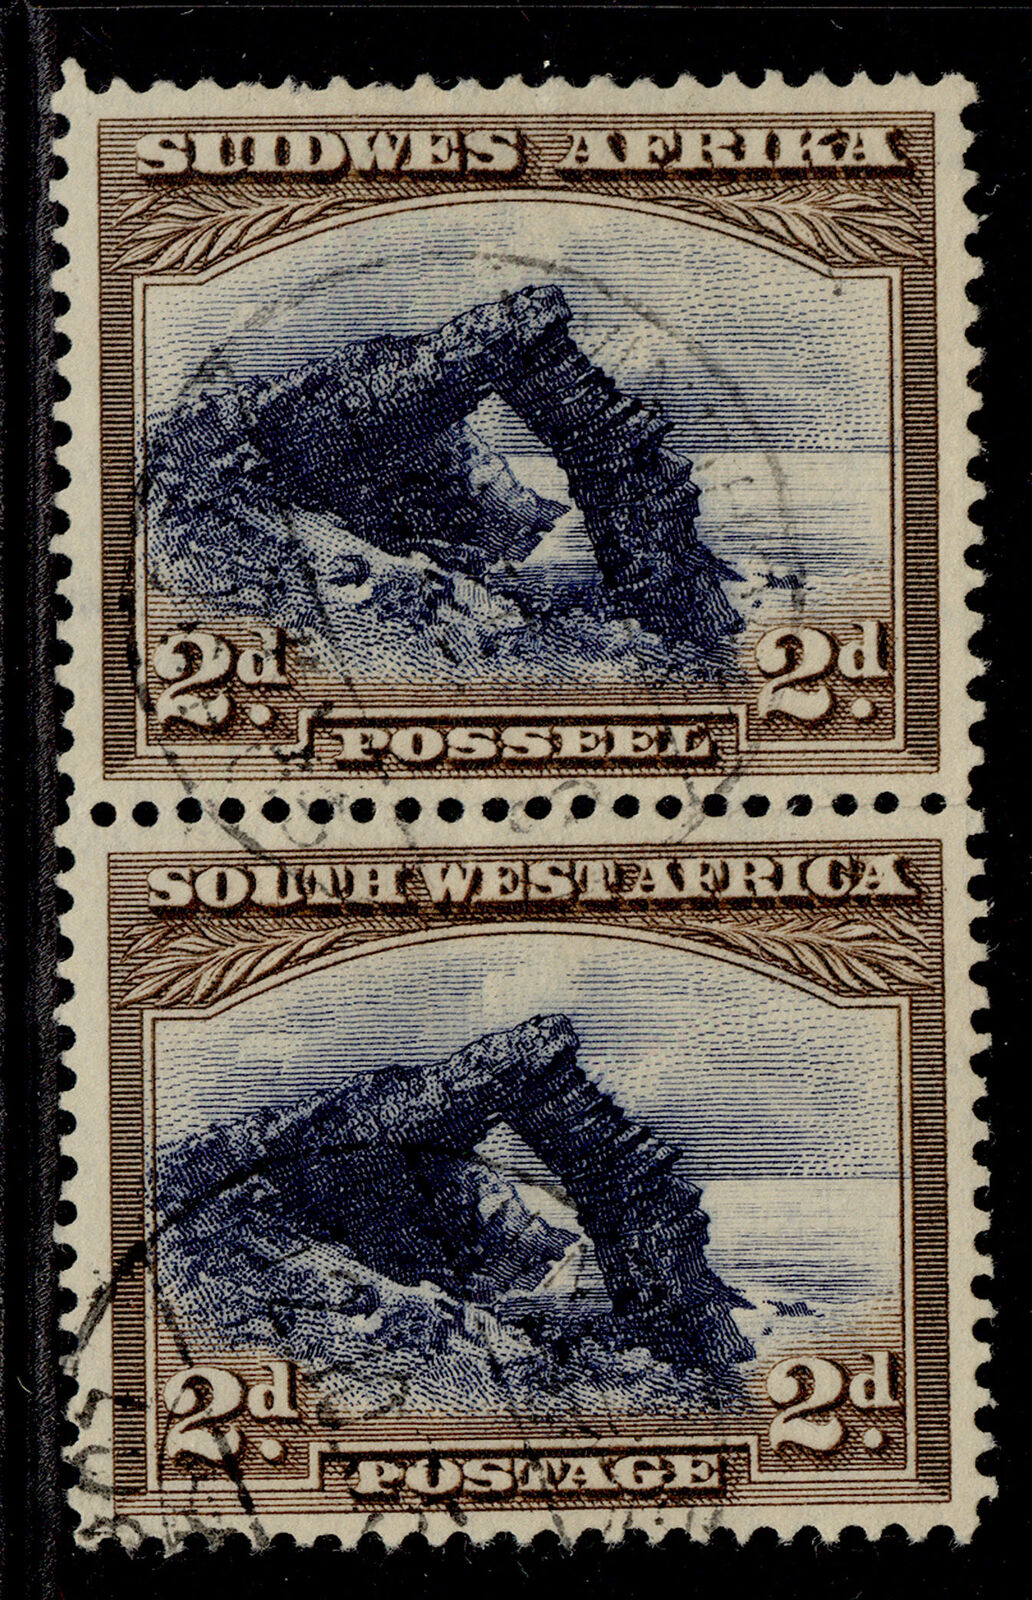 SOUTH WEST AFRICA GV SG76, 2d blue  brown, FINE USED. Cat £10.